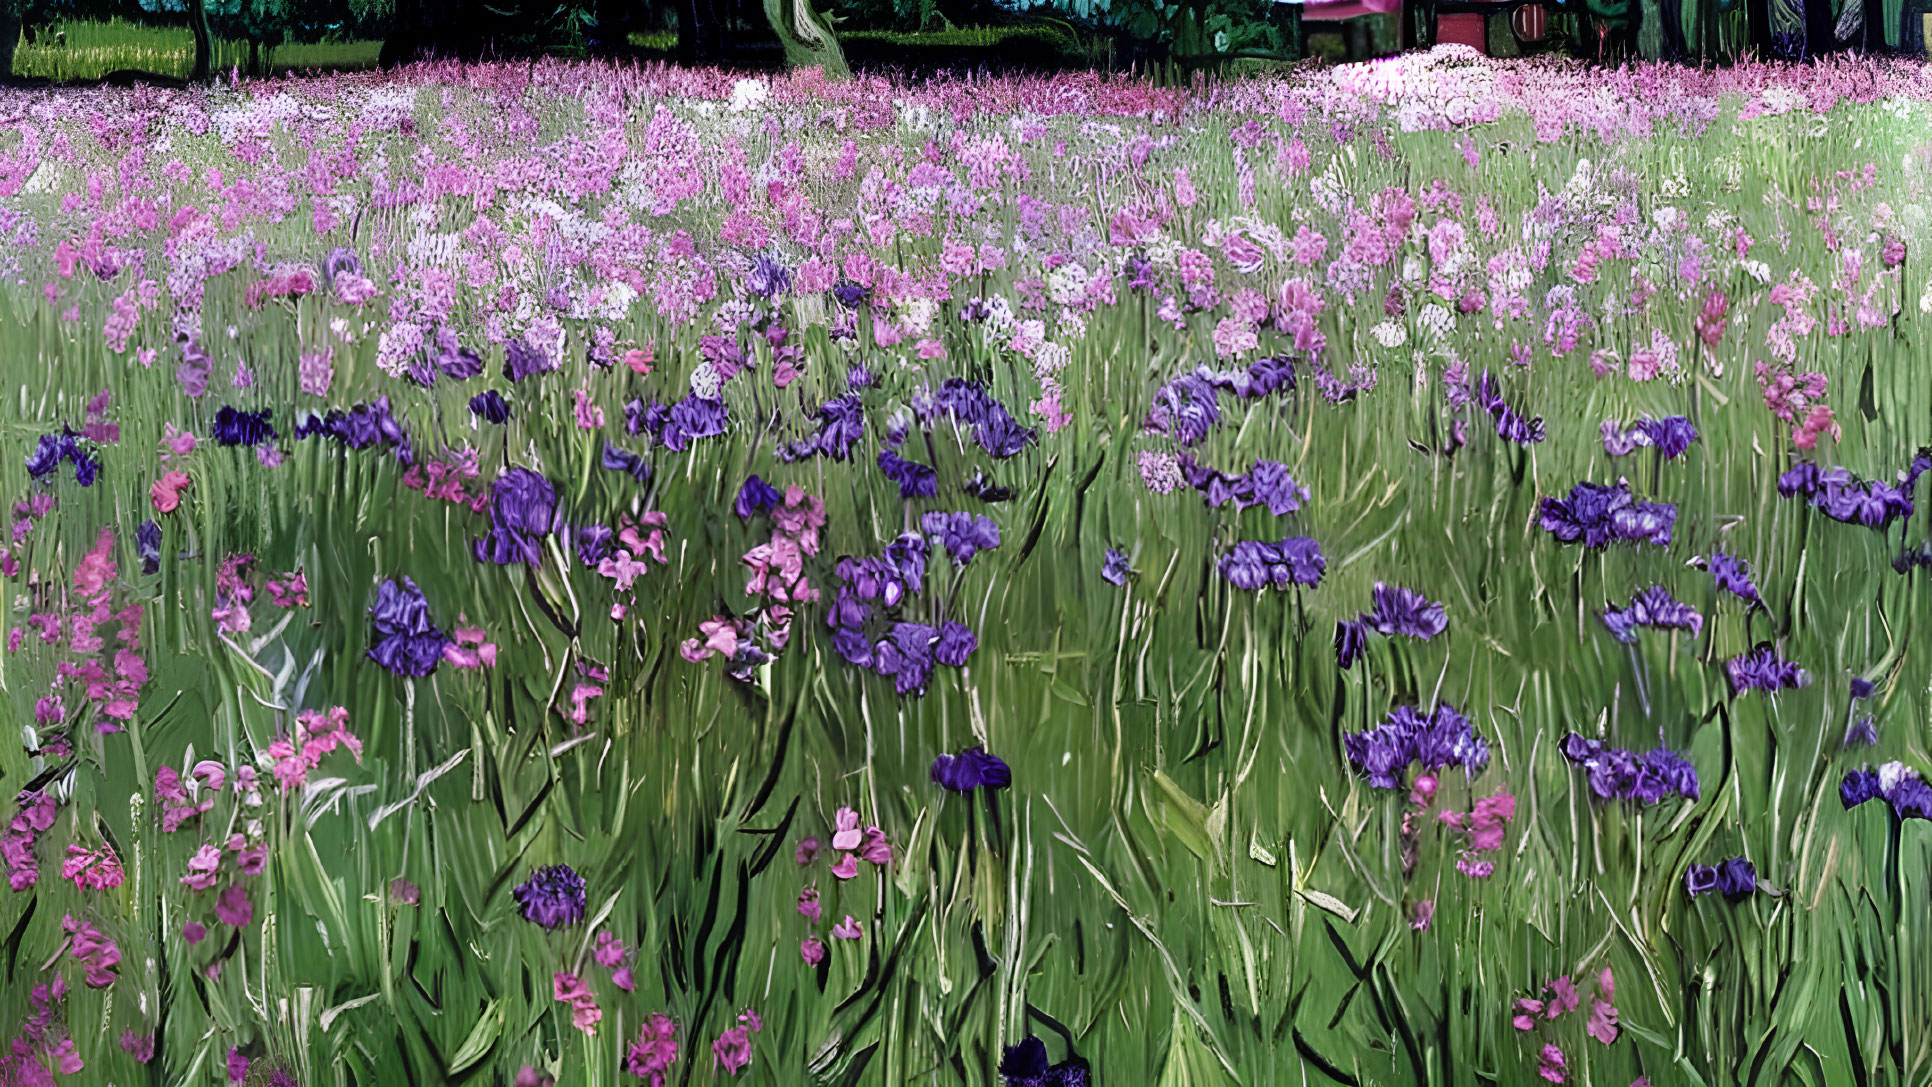 Lush purple and pink irises in a serene forest setting